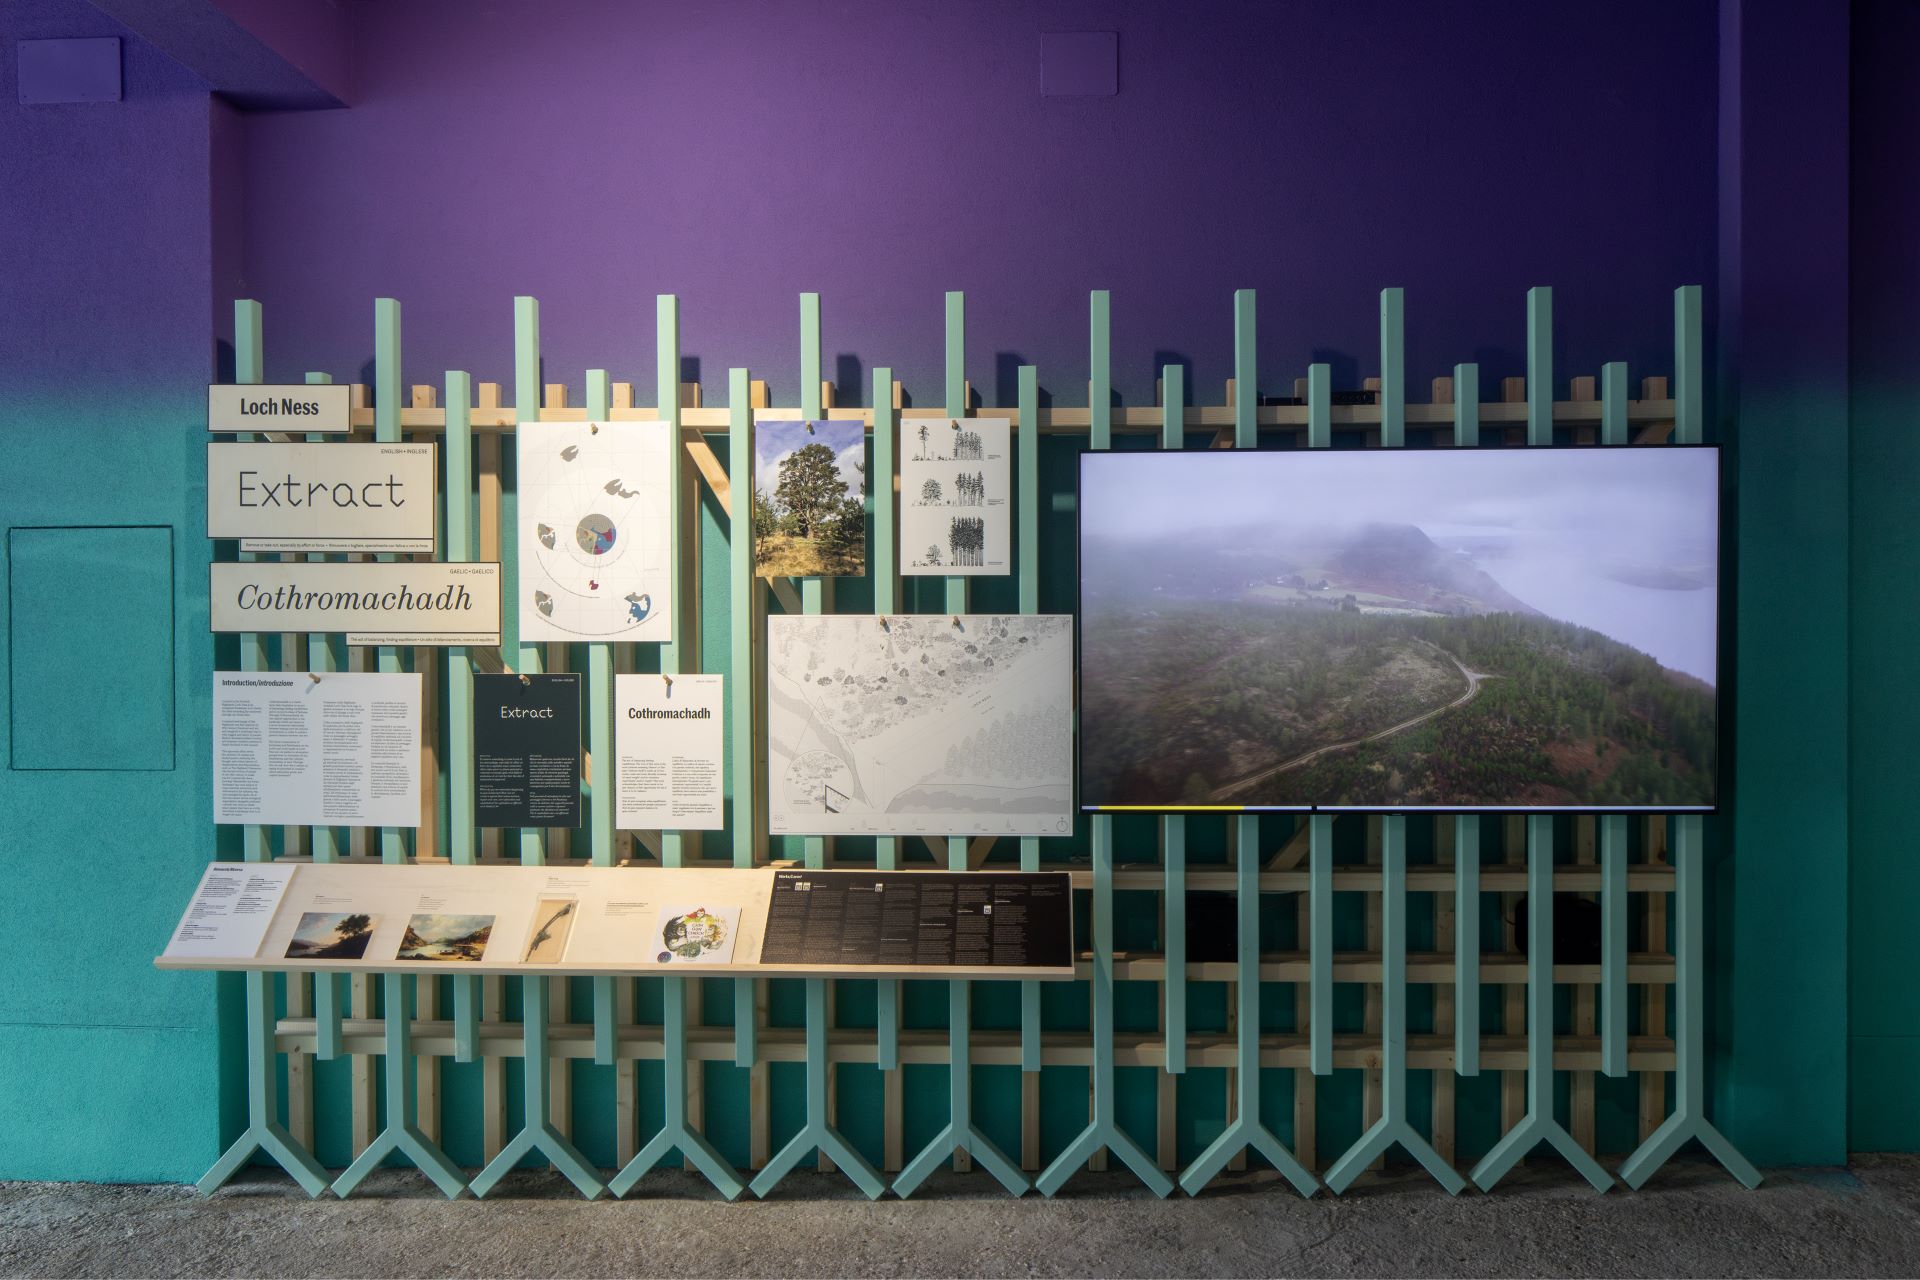 A photograph of a section of an exhibition, featuring boards of text and images and a screen showing videos of the Loch Ness landscape.